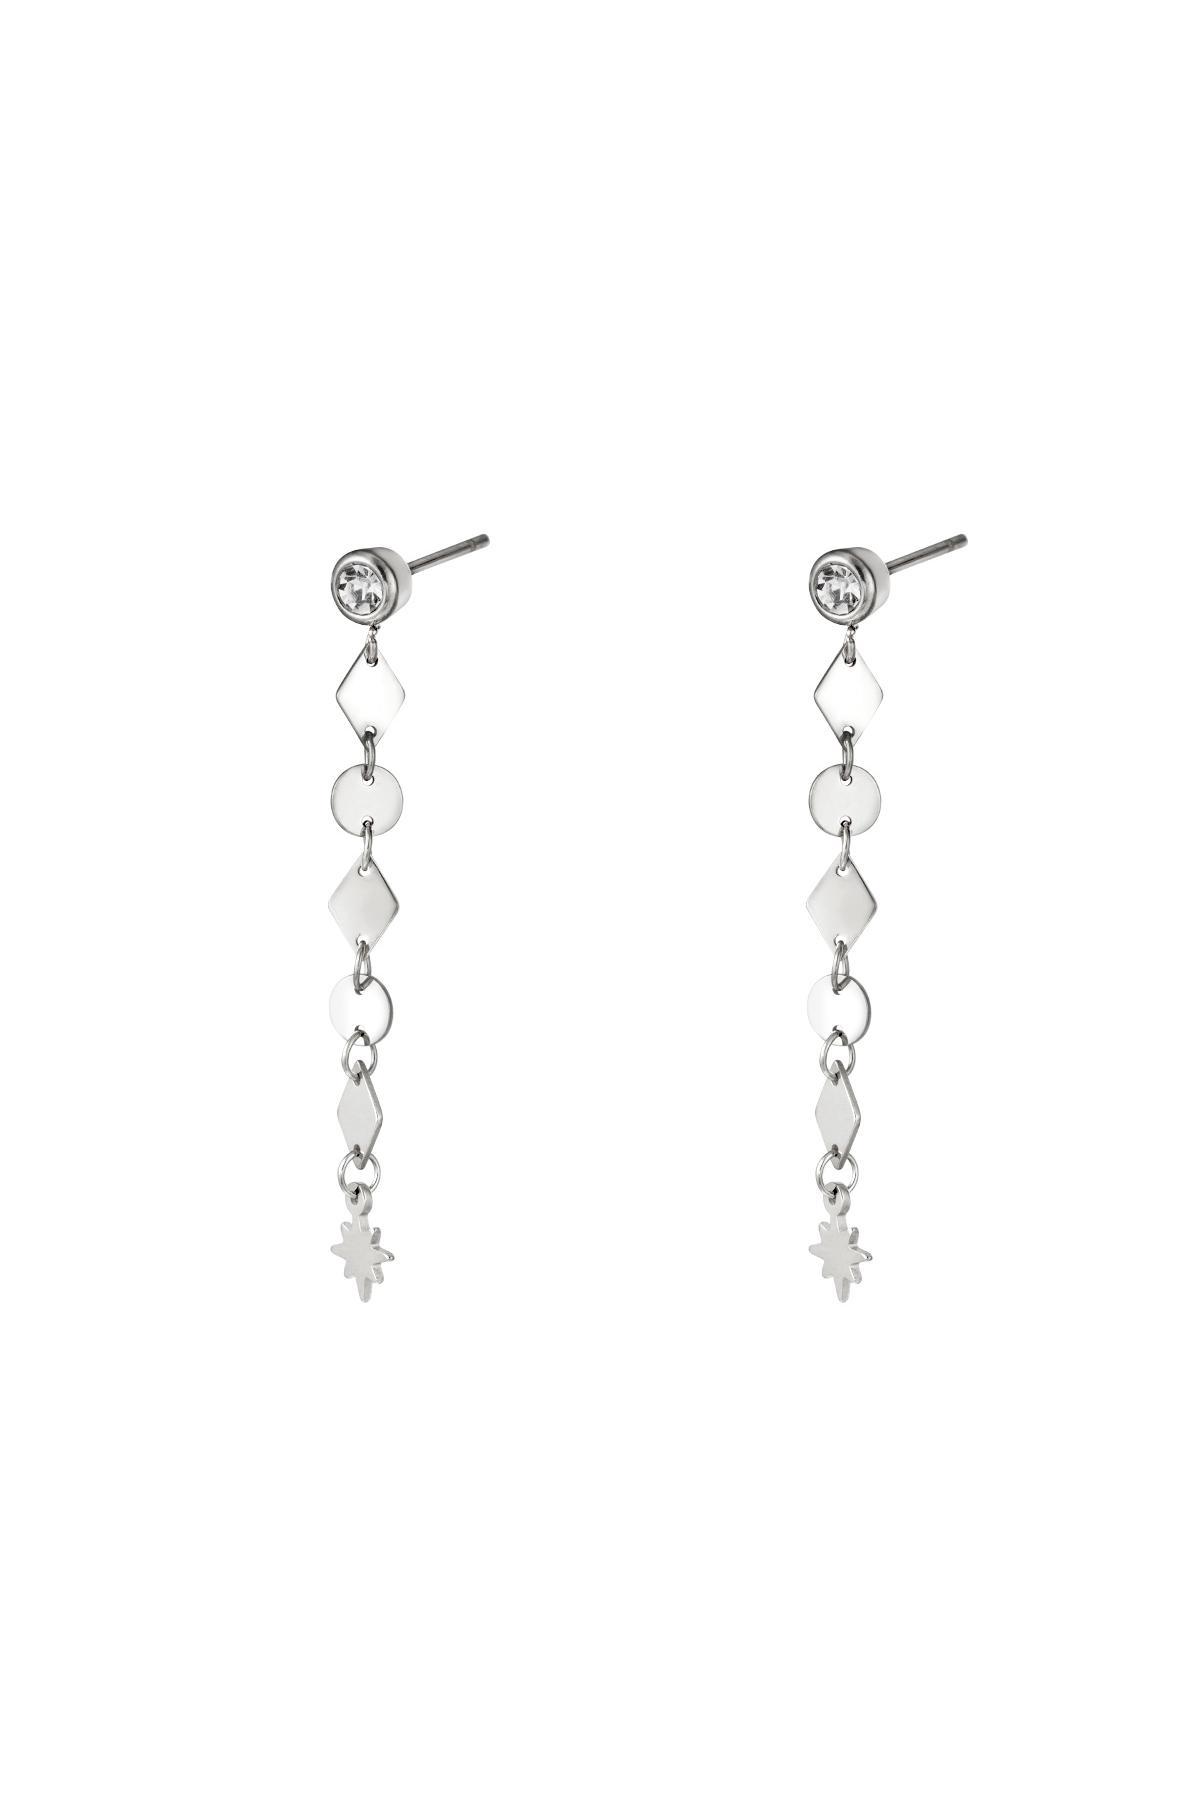 Earrings different shapes Silver Stainless Steel 